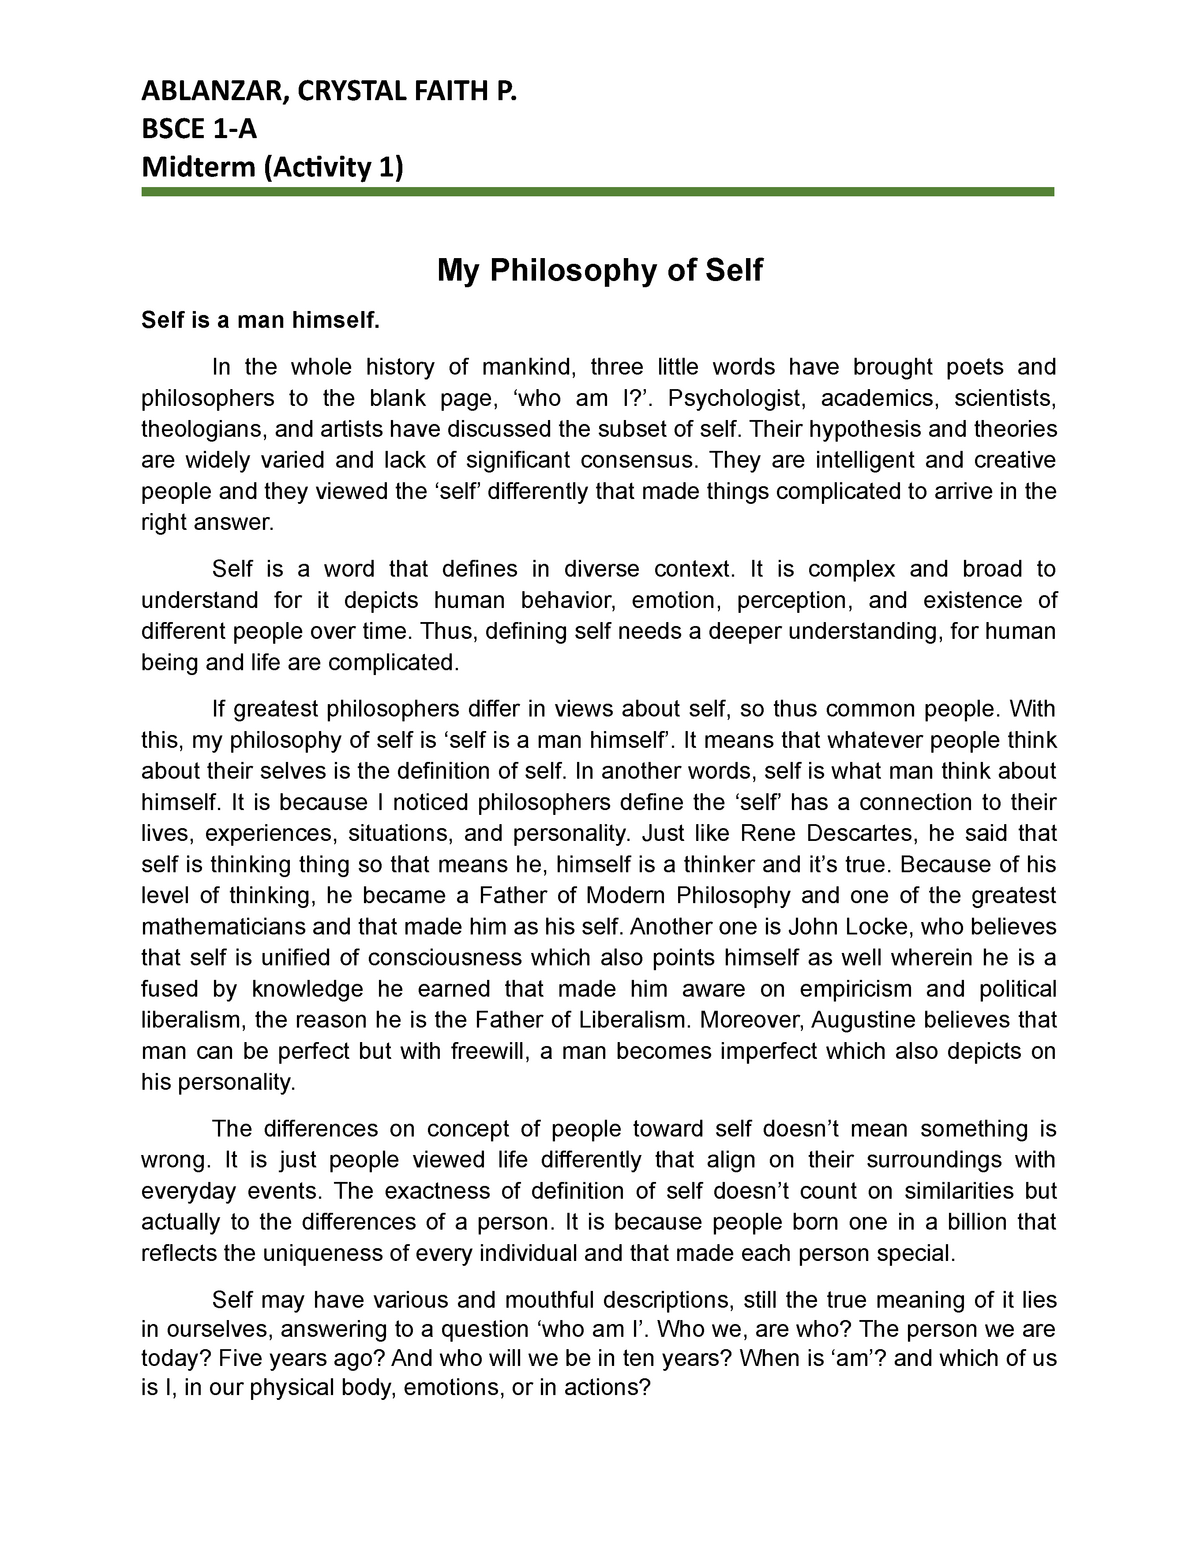 make your own philosophy in life essay brainly